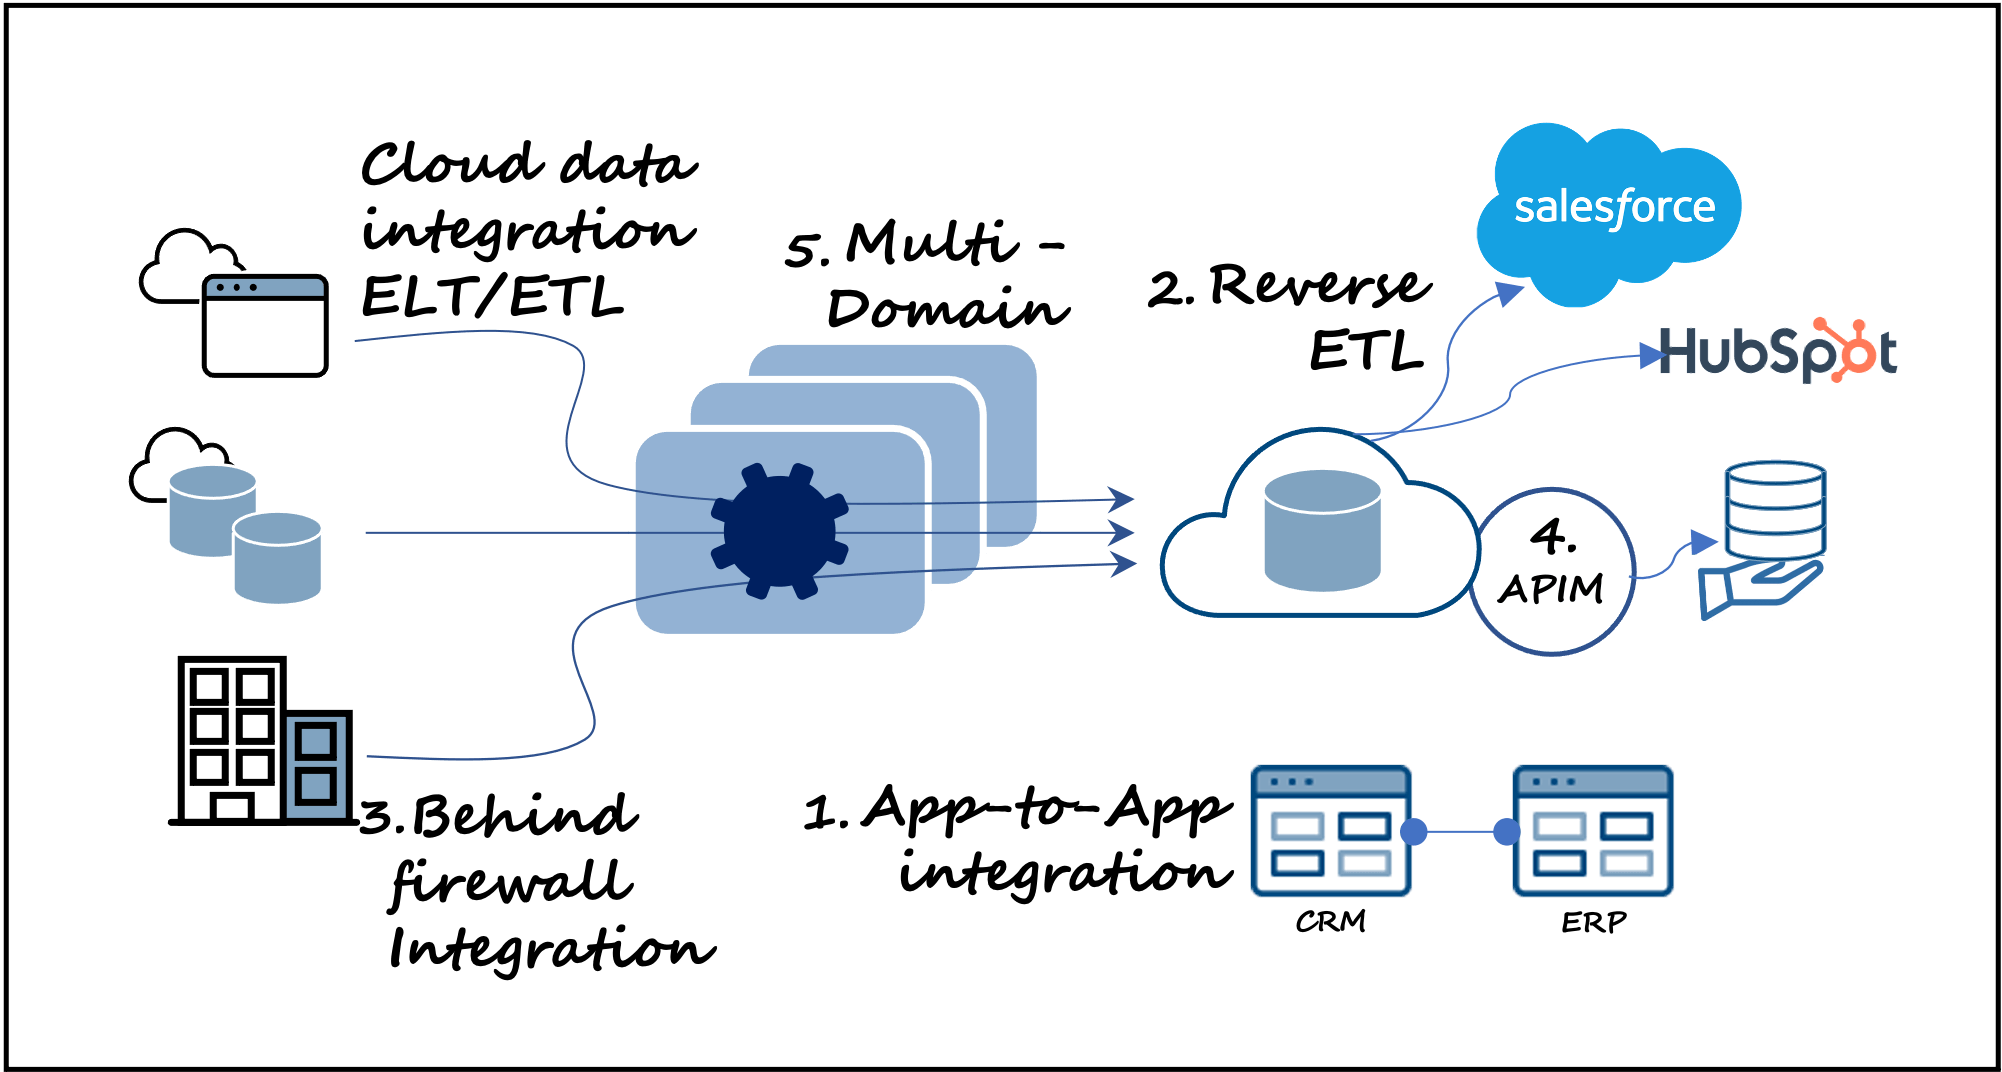 Illustration of a more modern data architecture that delivers five capabilities, all within one unified platform, going beyond typical ELT/ETL data integration (only) architectures 